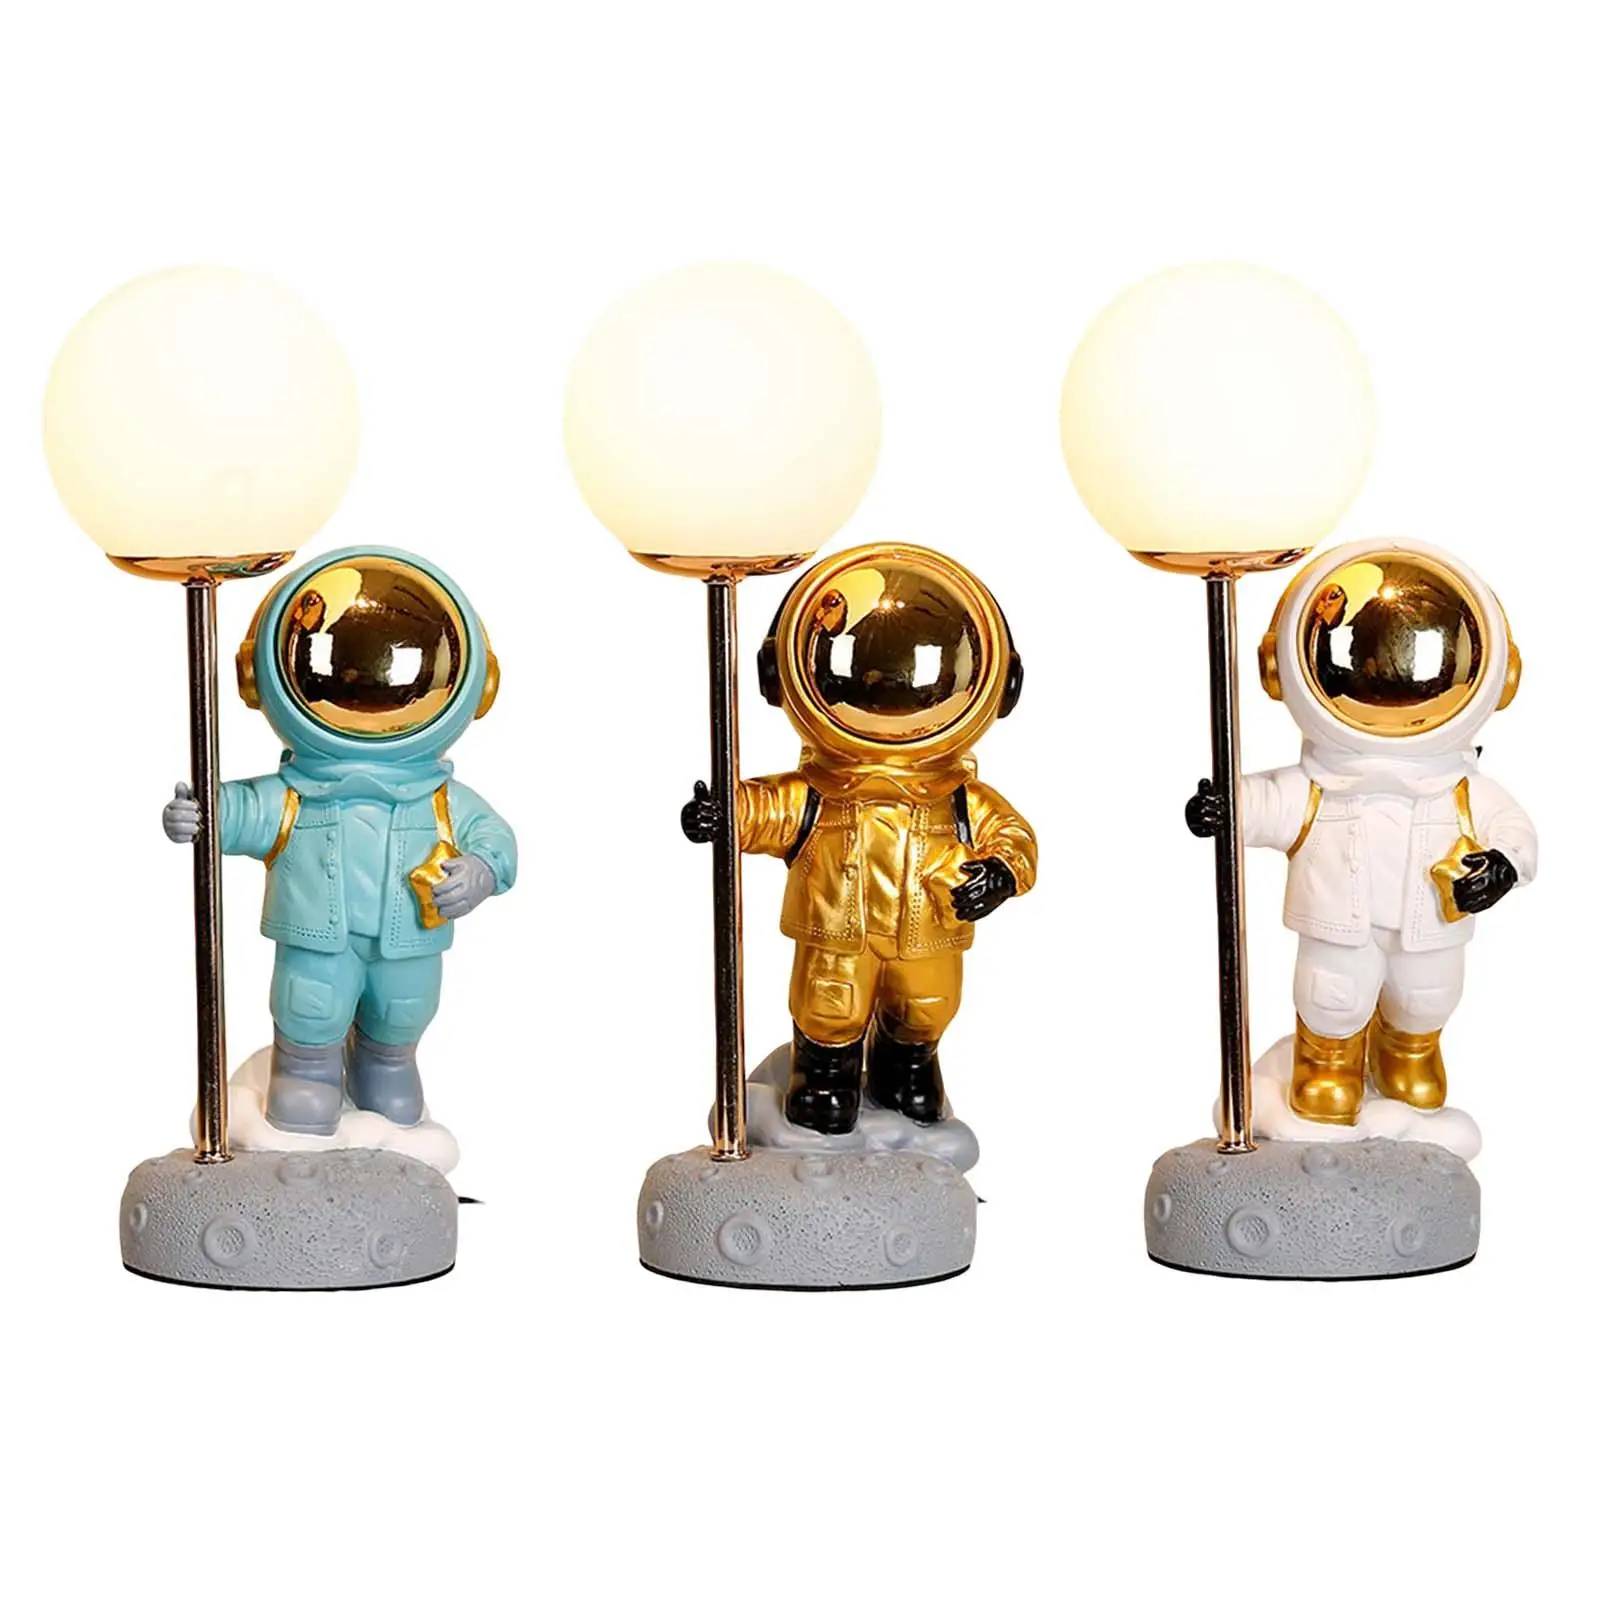 Modern Astronaut LED Table Lamp Bedside Table Lamp Spaceman Lamp for Desktop Decoration Boys Birthday Gifts